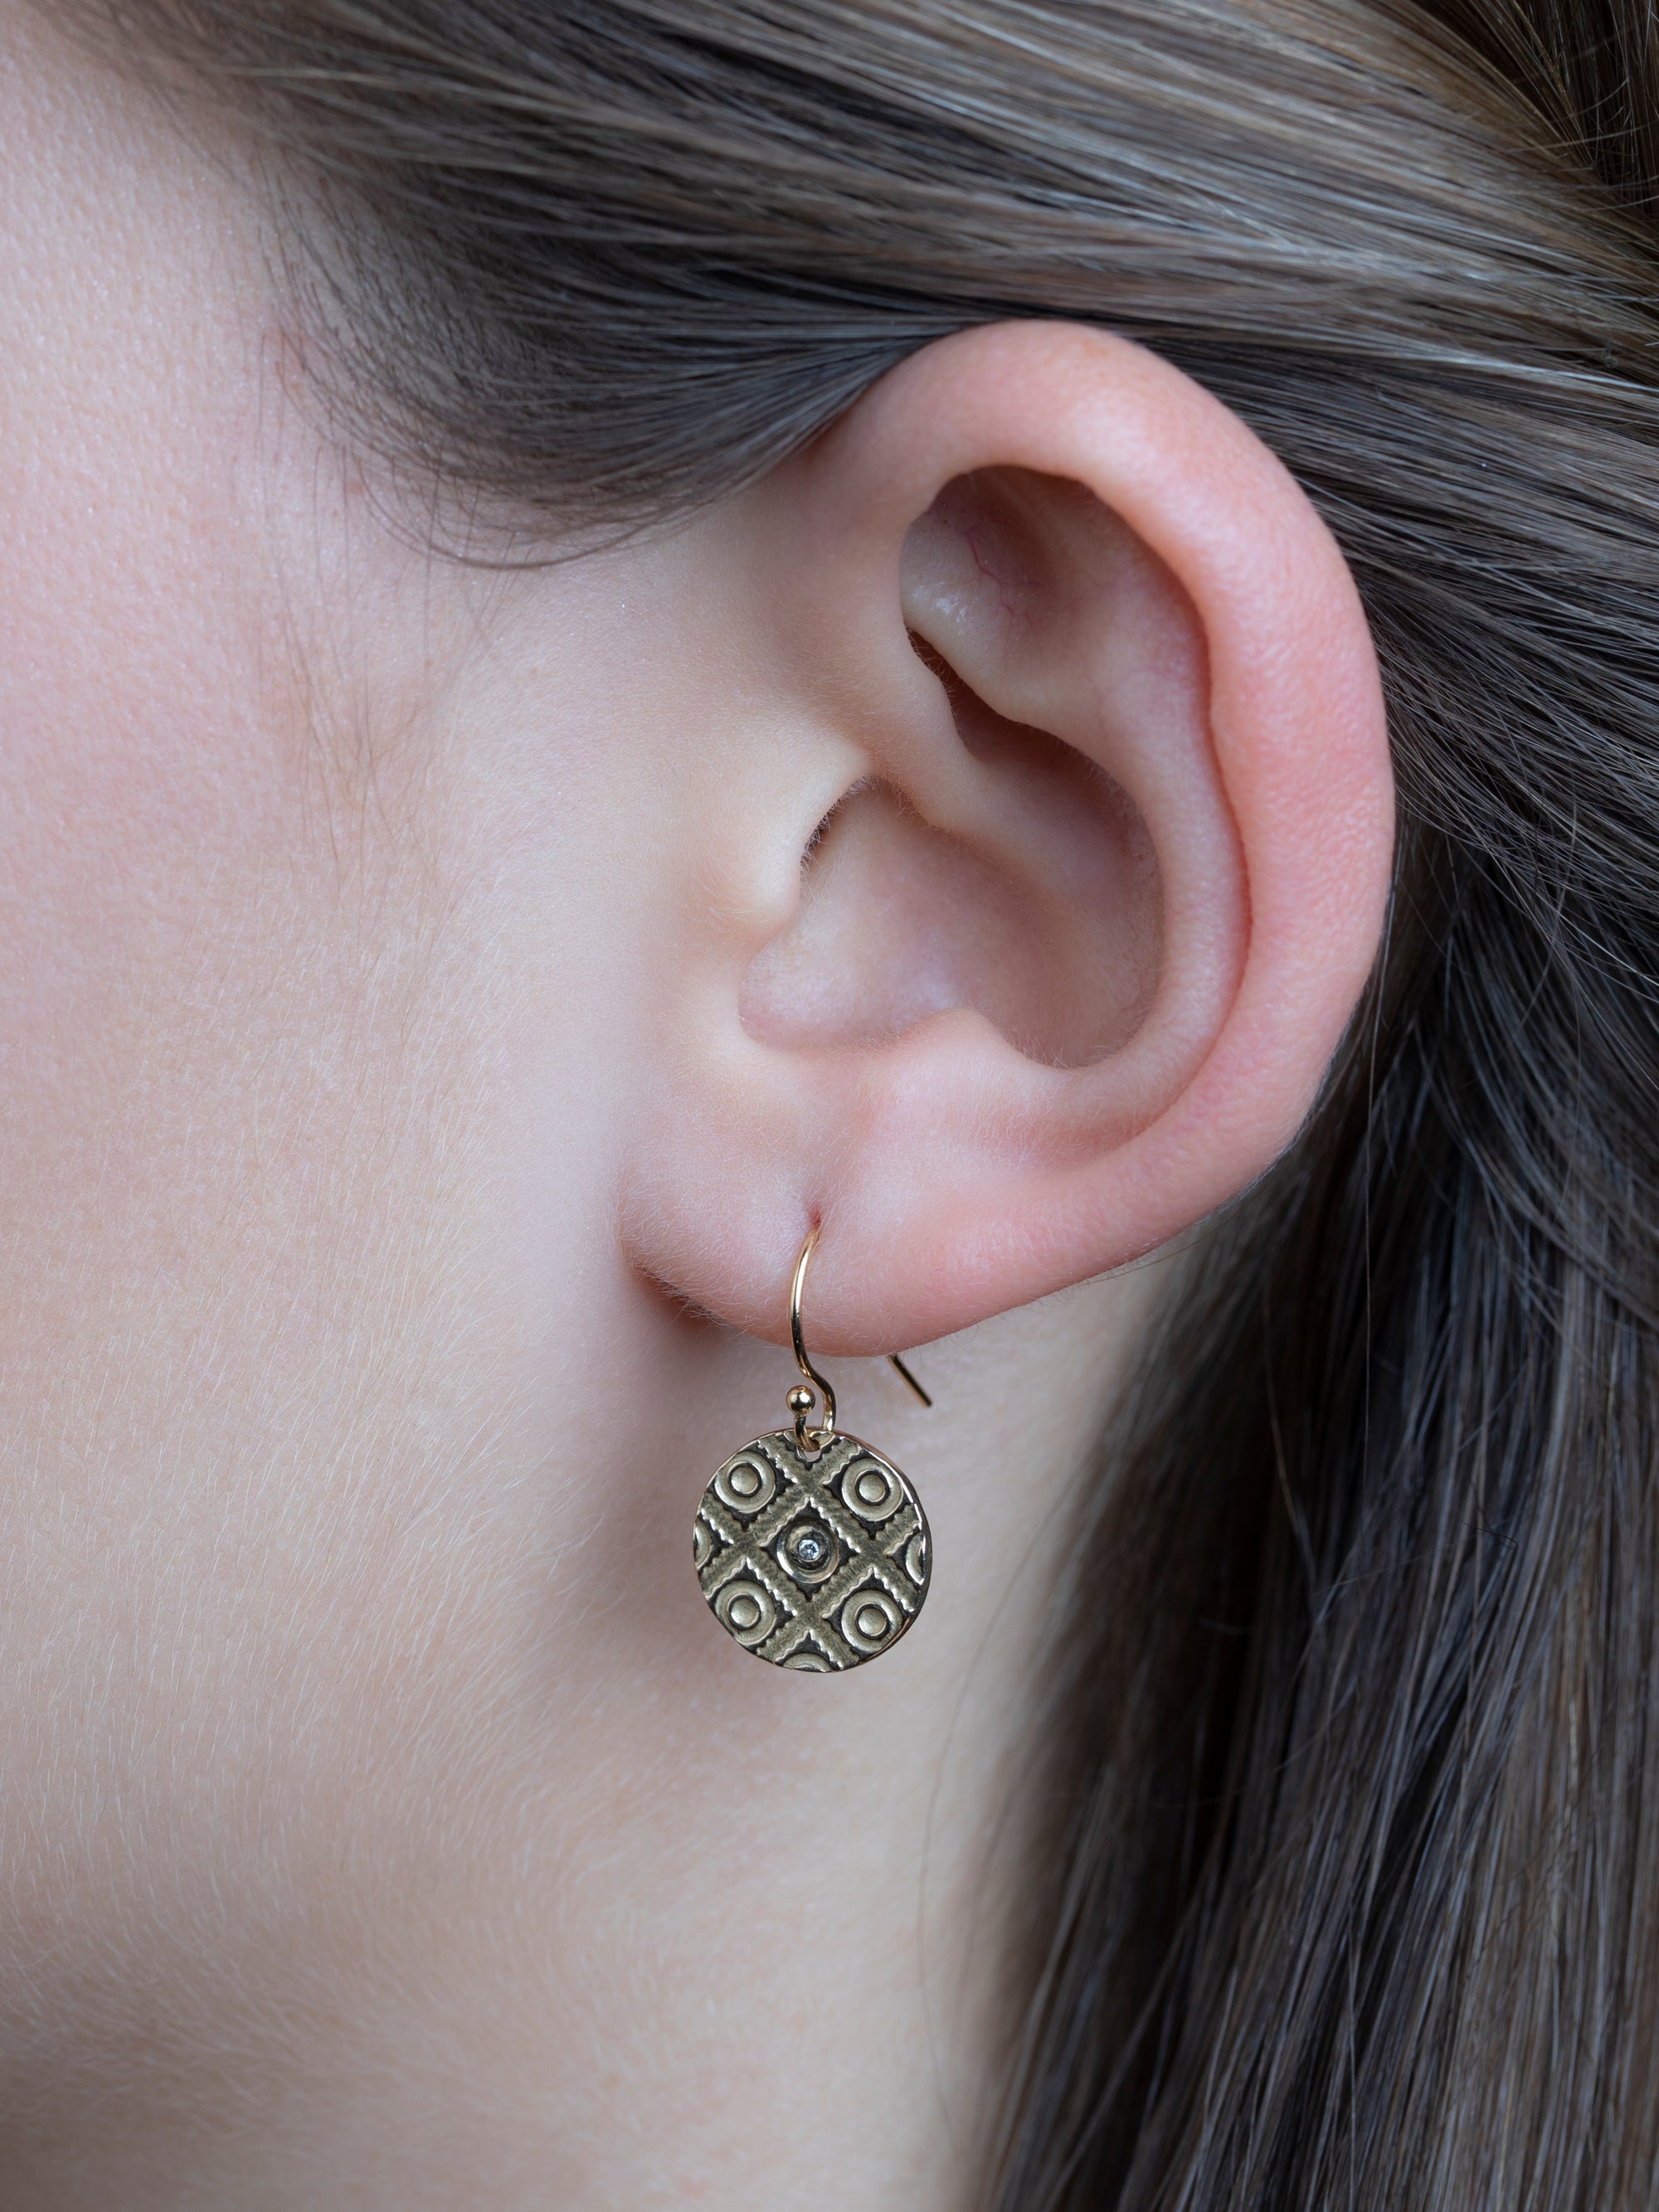 Morocco Earrings - Large "bring life texture"